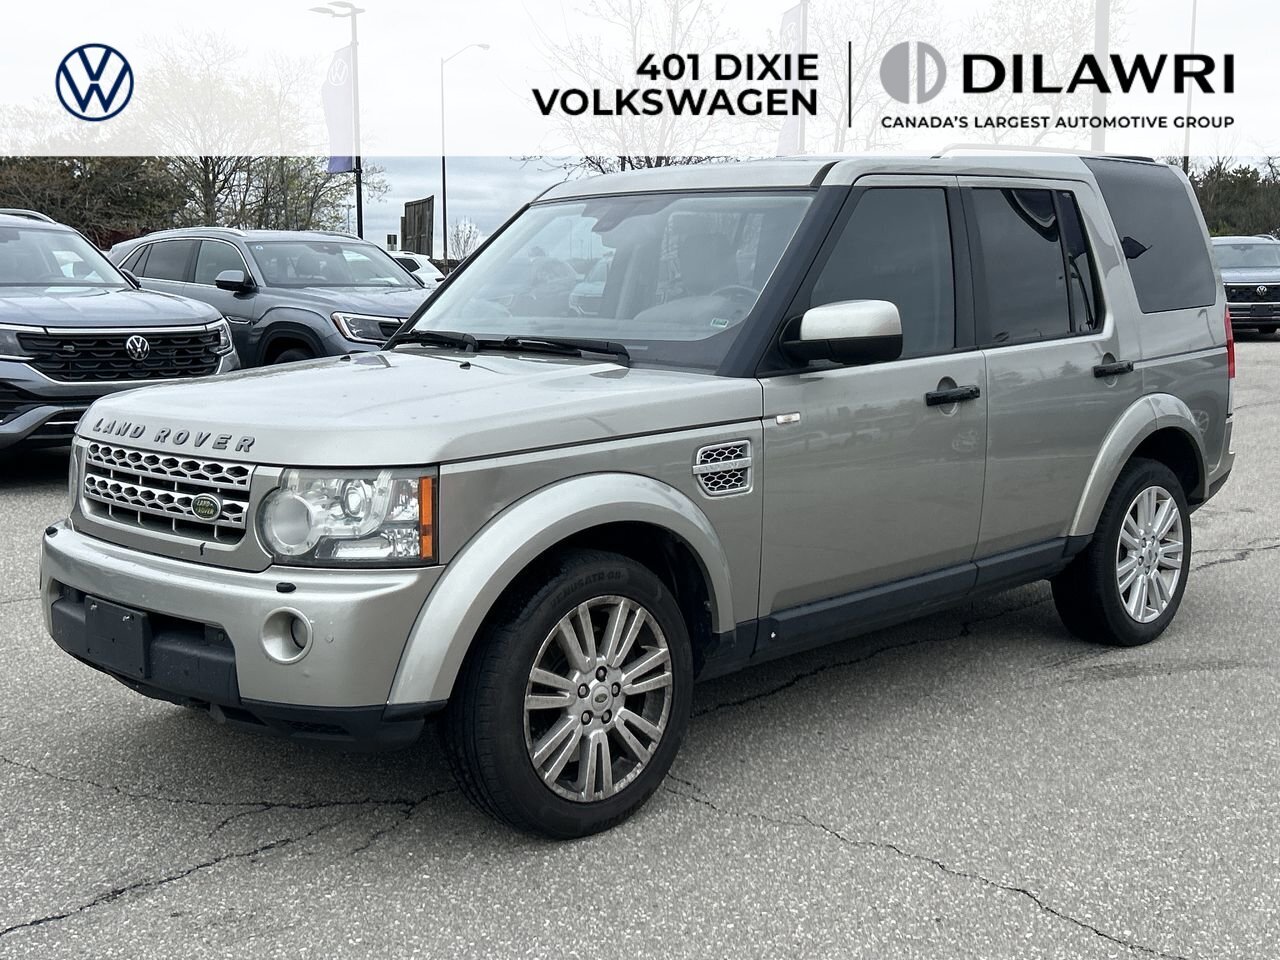 2011 Land Rover LR4 LUX Clean Carfax| Alloy Wheels| Leather Seats| Bac